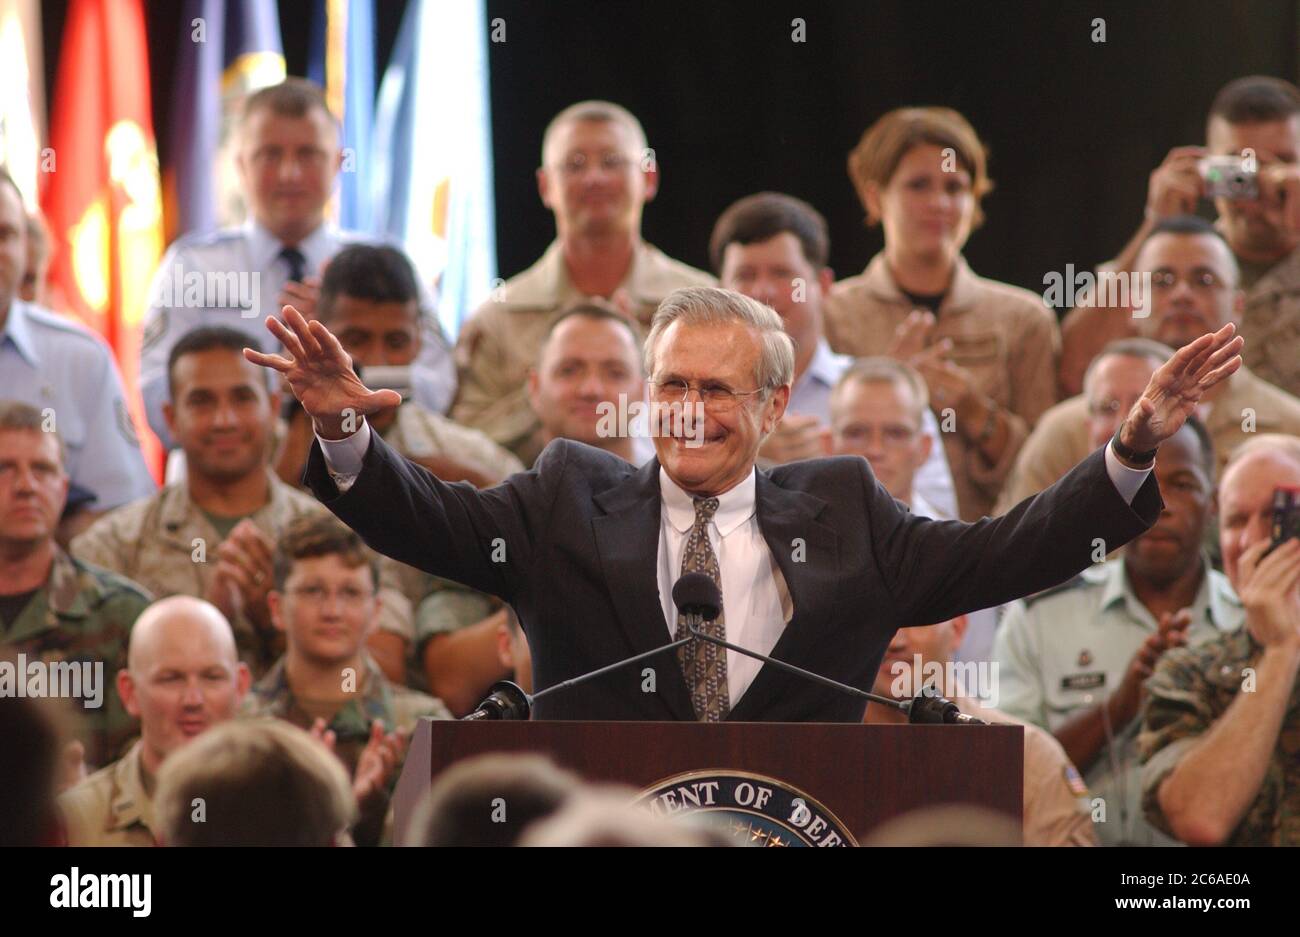 San Antonio, Texas USA, August 25, 2003: Secretary of Defense Donald Rumsfeld holds a town-hall style question-and-answer session with about 3,000 Texas troops in a hangar at Lackland Air Force Base, telling the troops that U.S. commanders say they have enough troops to combat guerilla attacks in Iraq. Rumsfeld answered questions for about an hour after touring the base. ©Bob Daemmrich Stock Photo